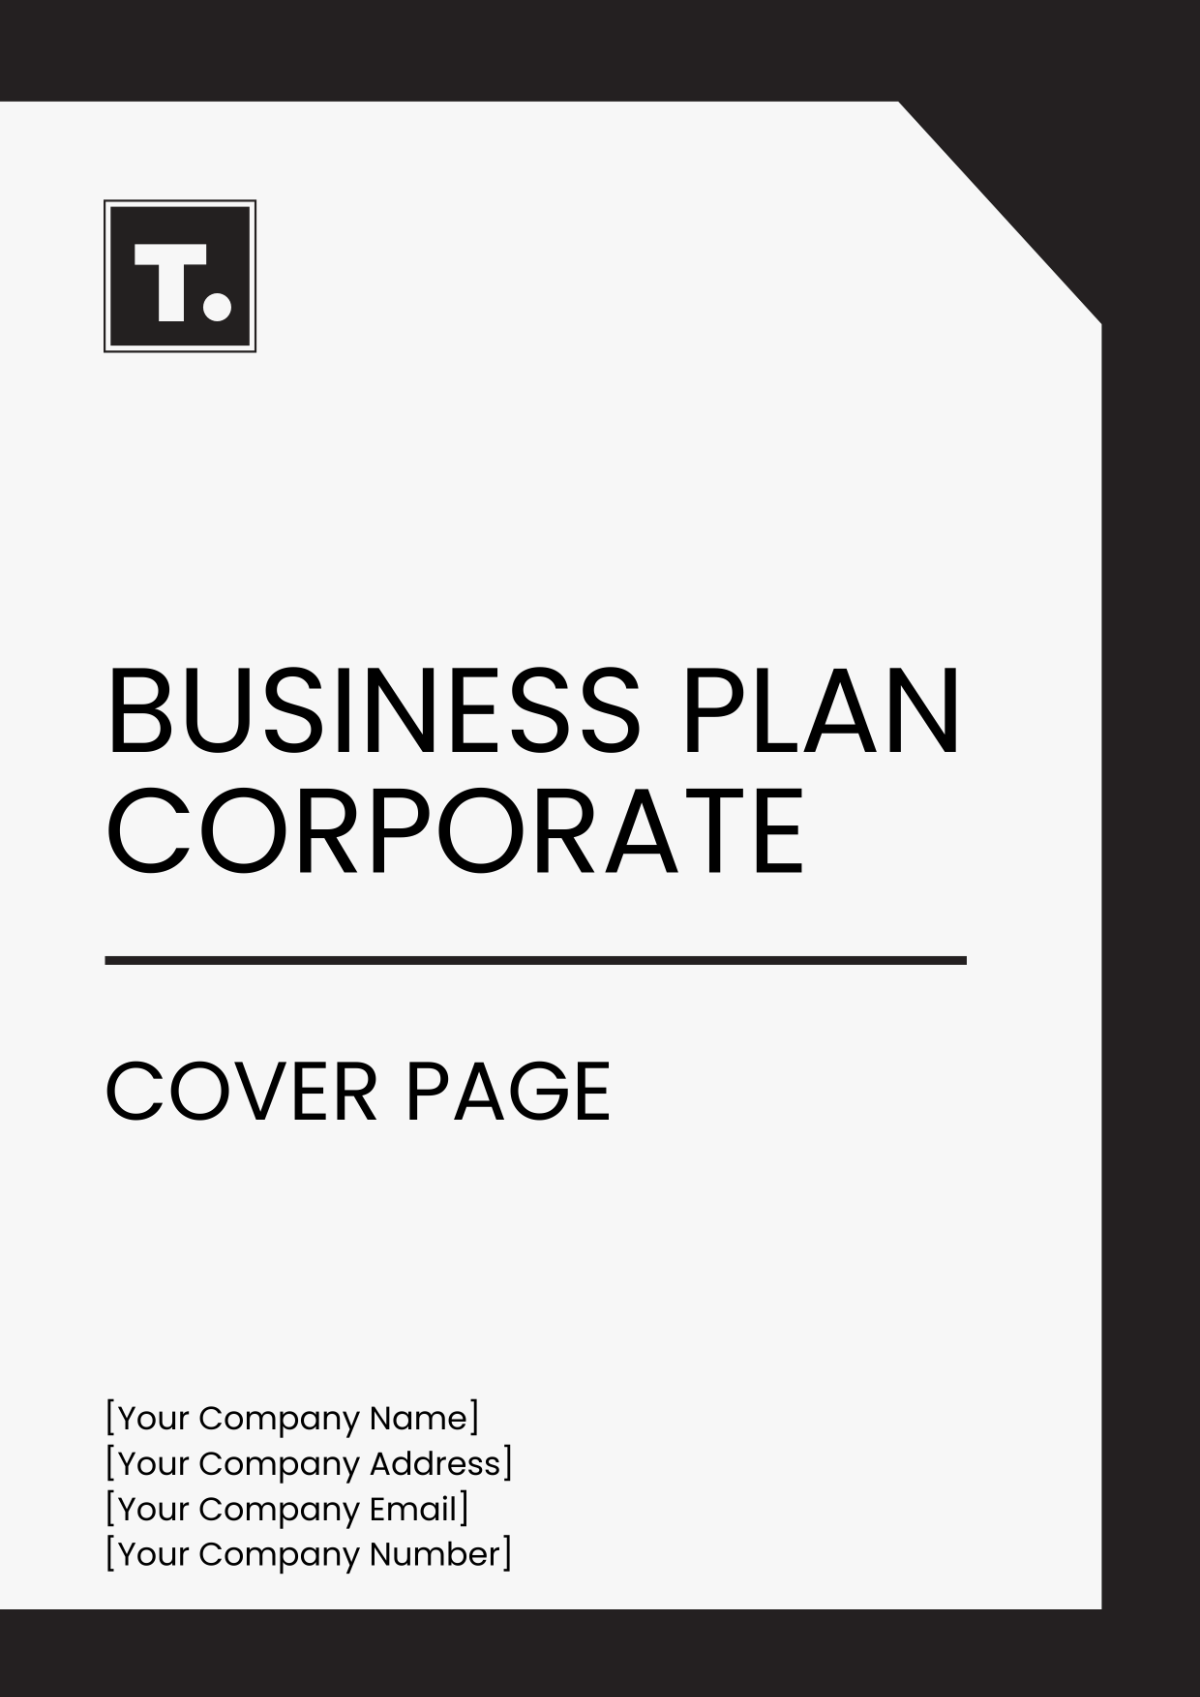 Business Plan Corporate Cover Page